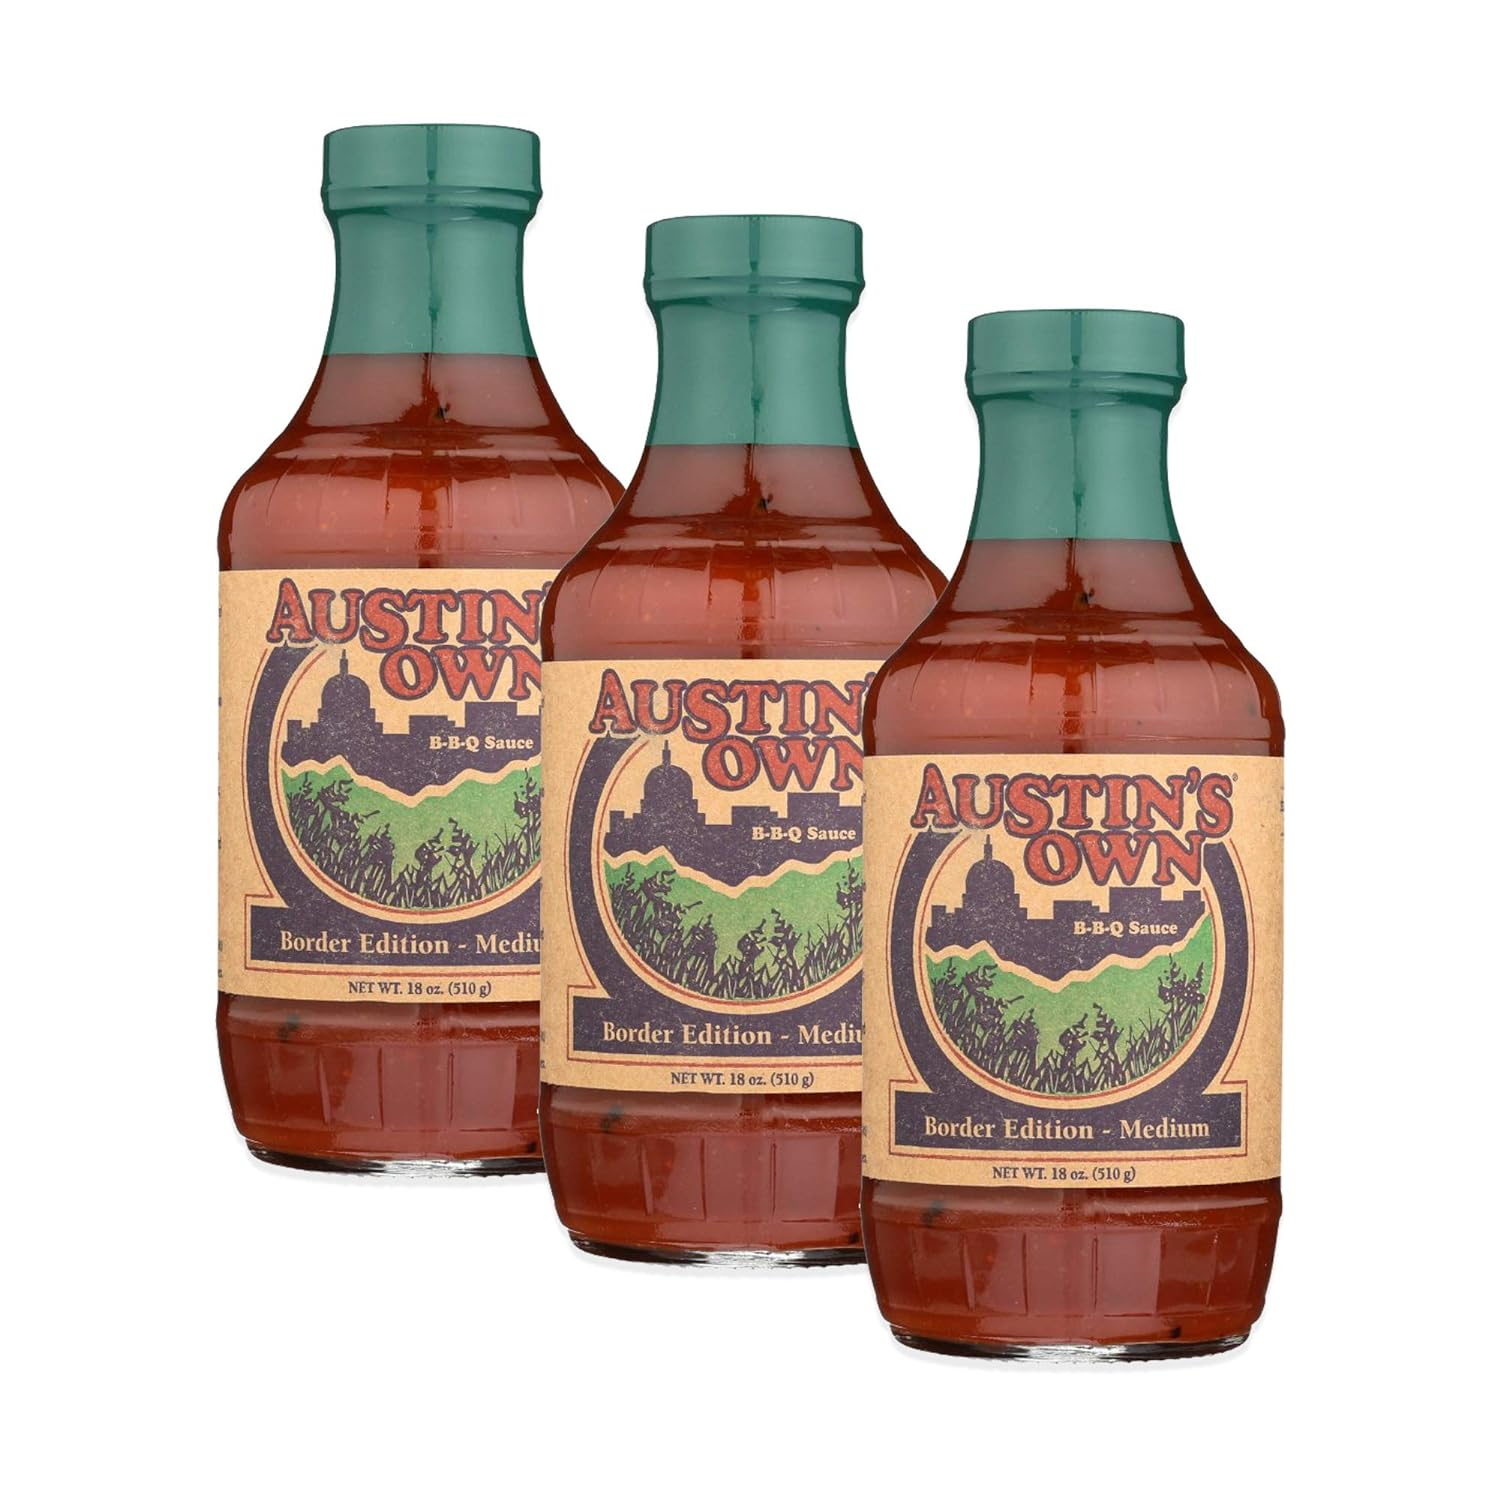 Austin's Own Border Edition - Medium BBQ Sauce 18oz Bottle (Pack of 3)3 - Barbecue Whizz...Watch My Smoke!